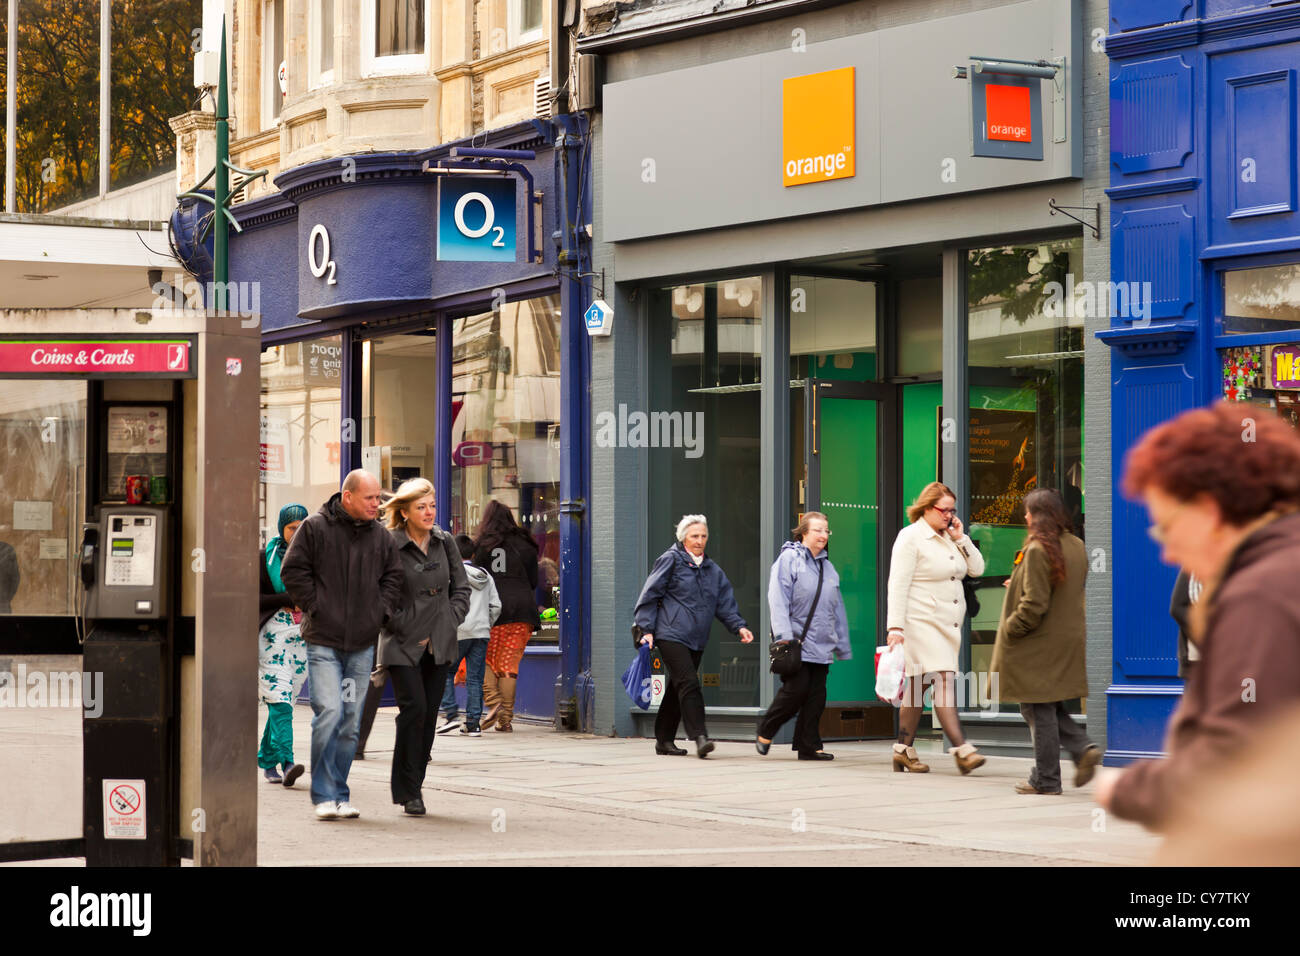 O2 and Orange shops next to each other on typical high street, its seems as city centres only have phone shops banks or coffee s Stock Photo